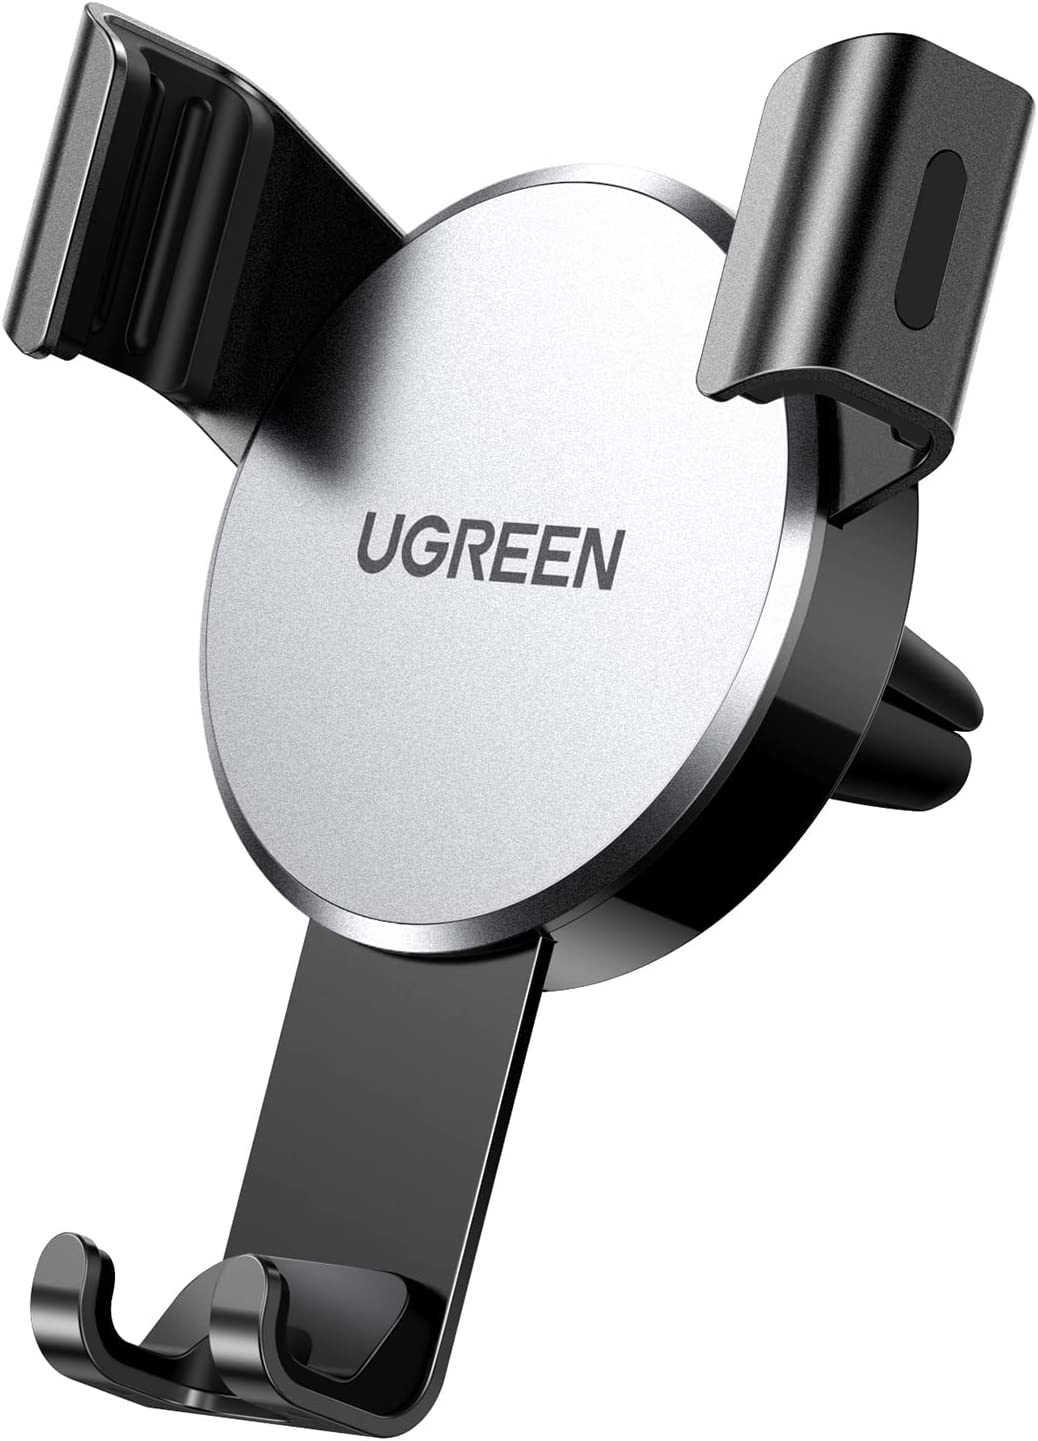 UGREEN Universal Gravity Car Phone Holder Air Vent Mount Auto Clamp